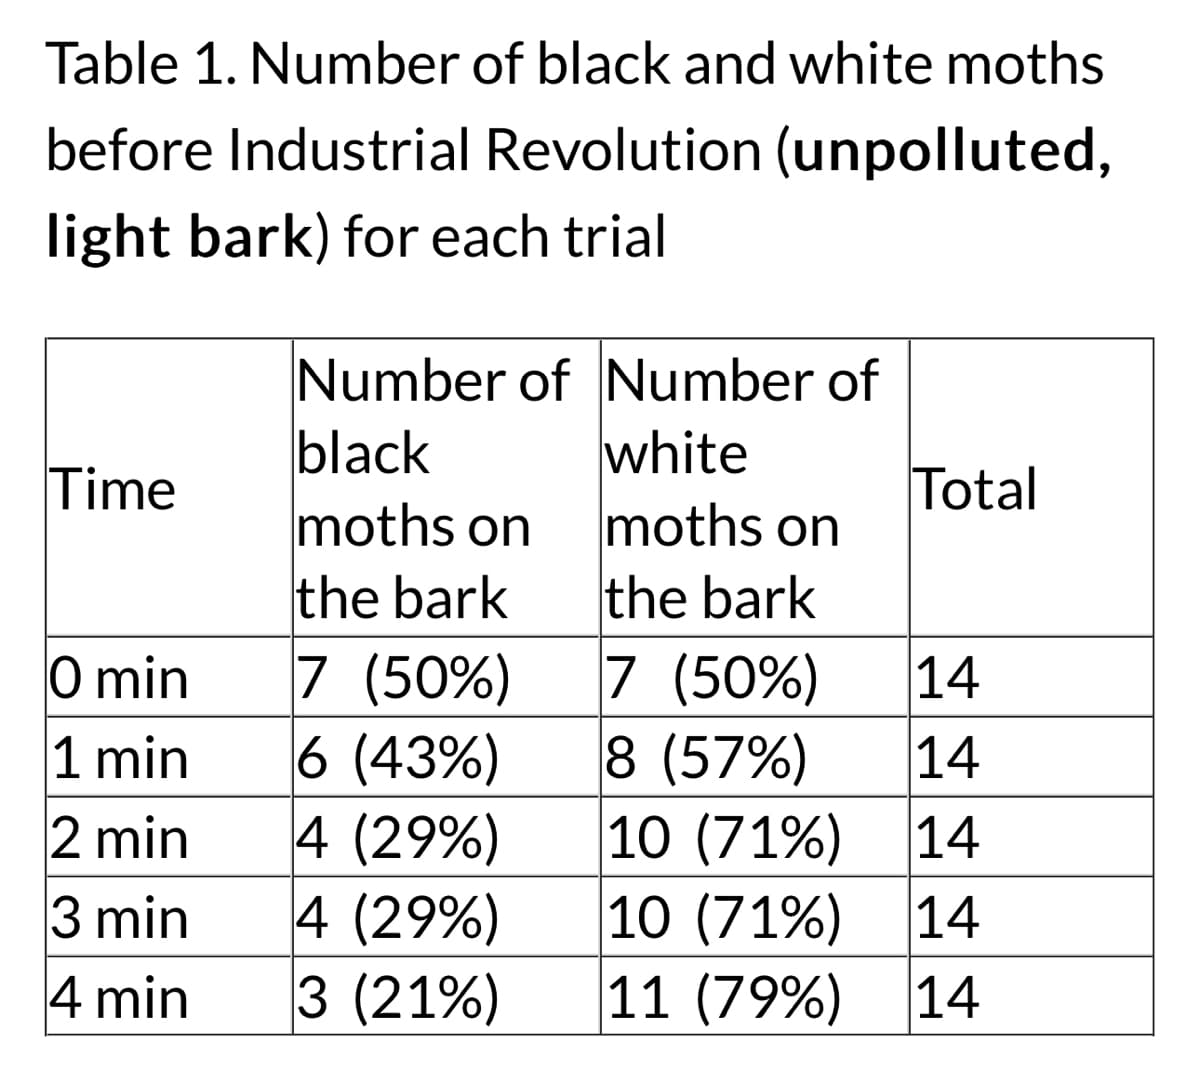 Table 1. Number of black and white moths
before Industrial Revolution (unpolluted,
light bark) for each trial
Time
0 min
1 min
2 min
3 min
4 min
Number of Number of
black
white
moths on
moths on
the bark
the bark
7 (50%)
7 (50%)
14
6 (43%)
8 (57%)
14
4 (29%)
10 (71%)
14
4 (29%)
10 (71%) 14
3 (21%)
11 (79%)
14
Total